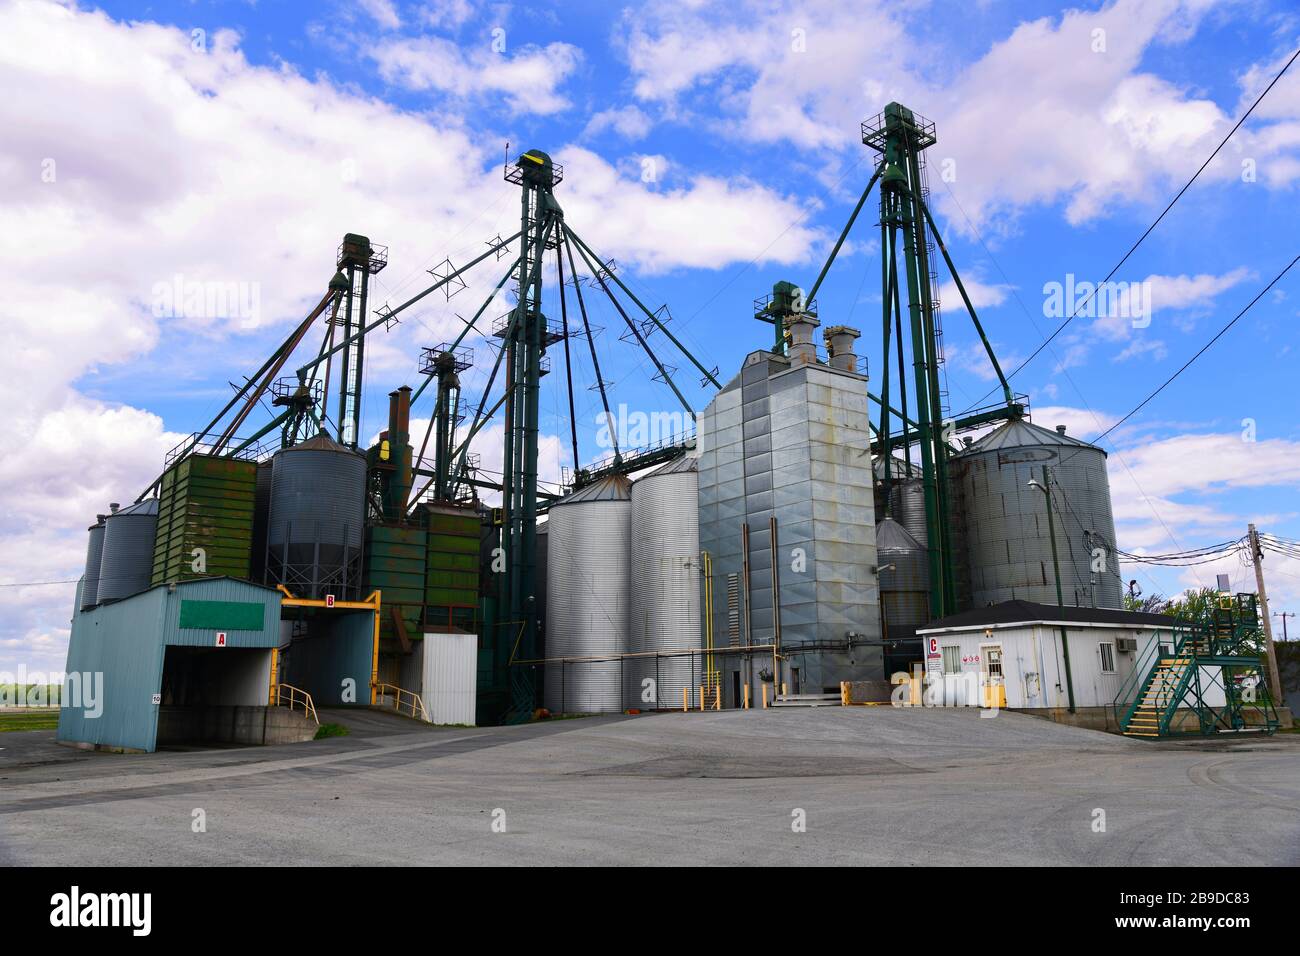 Driving around the backroads of Quebec you find these enormous farms where they grow soy beans and keep the produce in large steel tanks on the farm Stock Photo